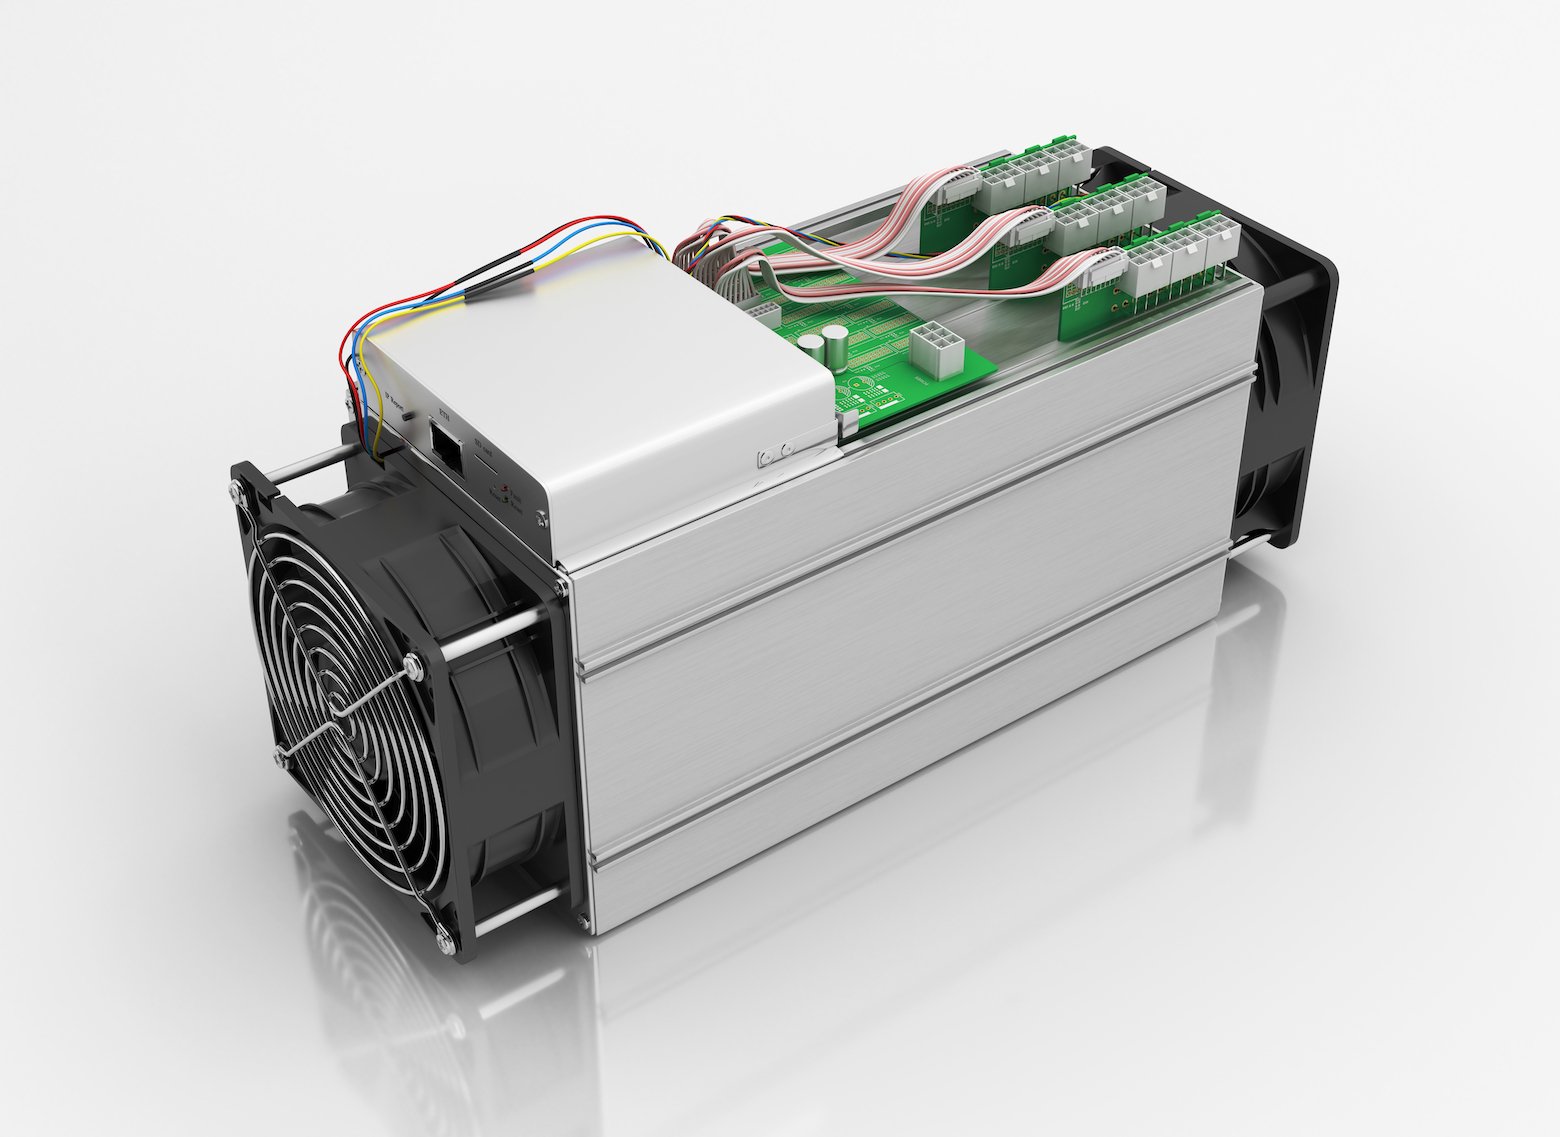 TAn ASIC miner in its white rectangular box with a large fan visible on the front end.